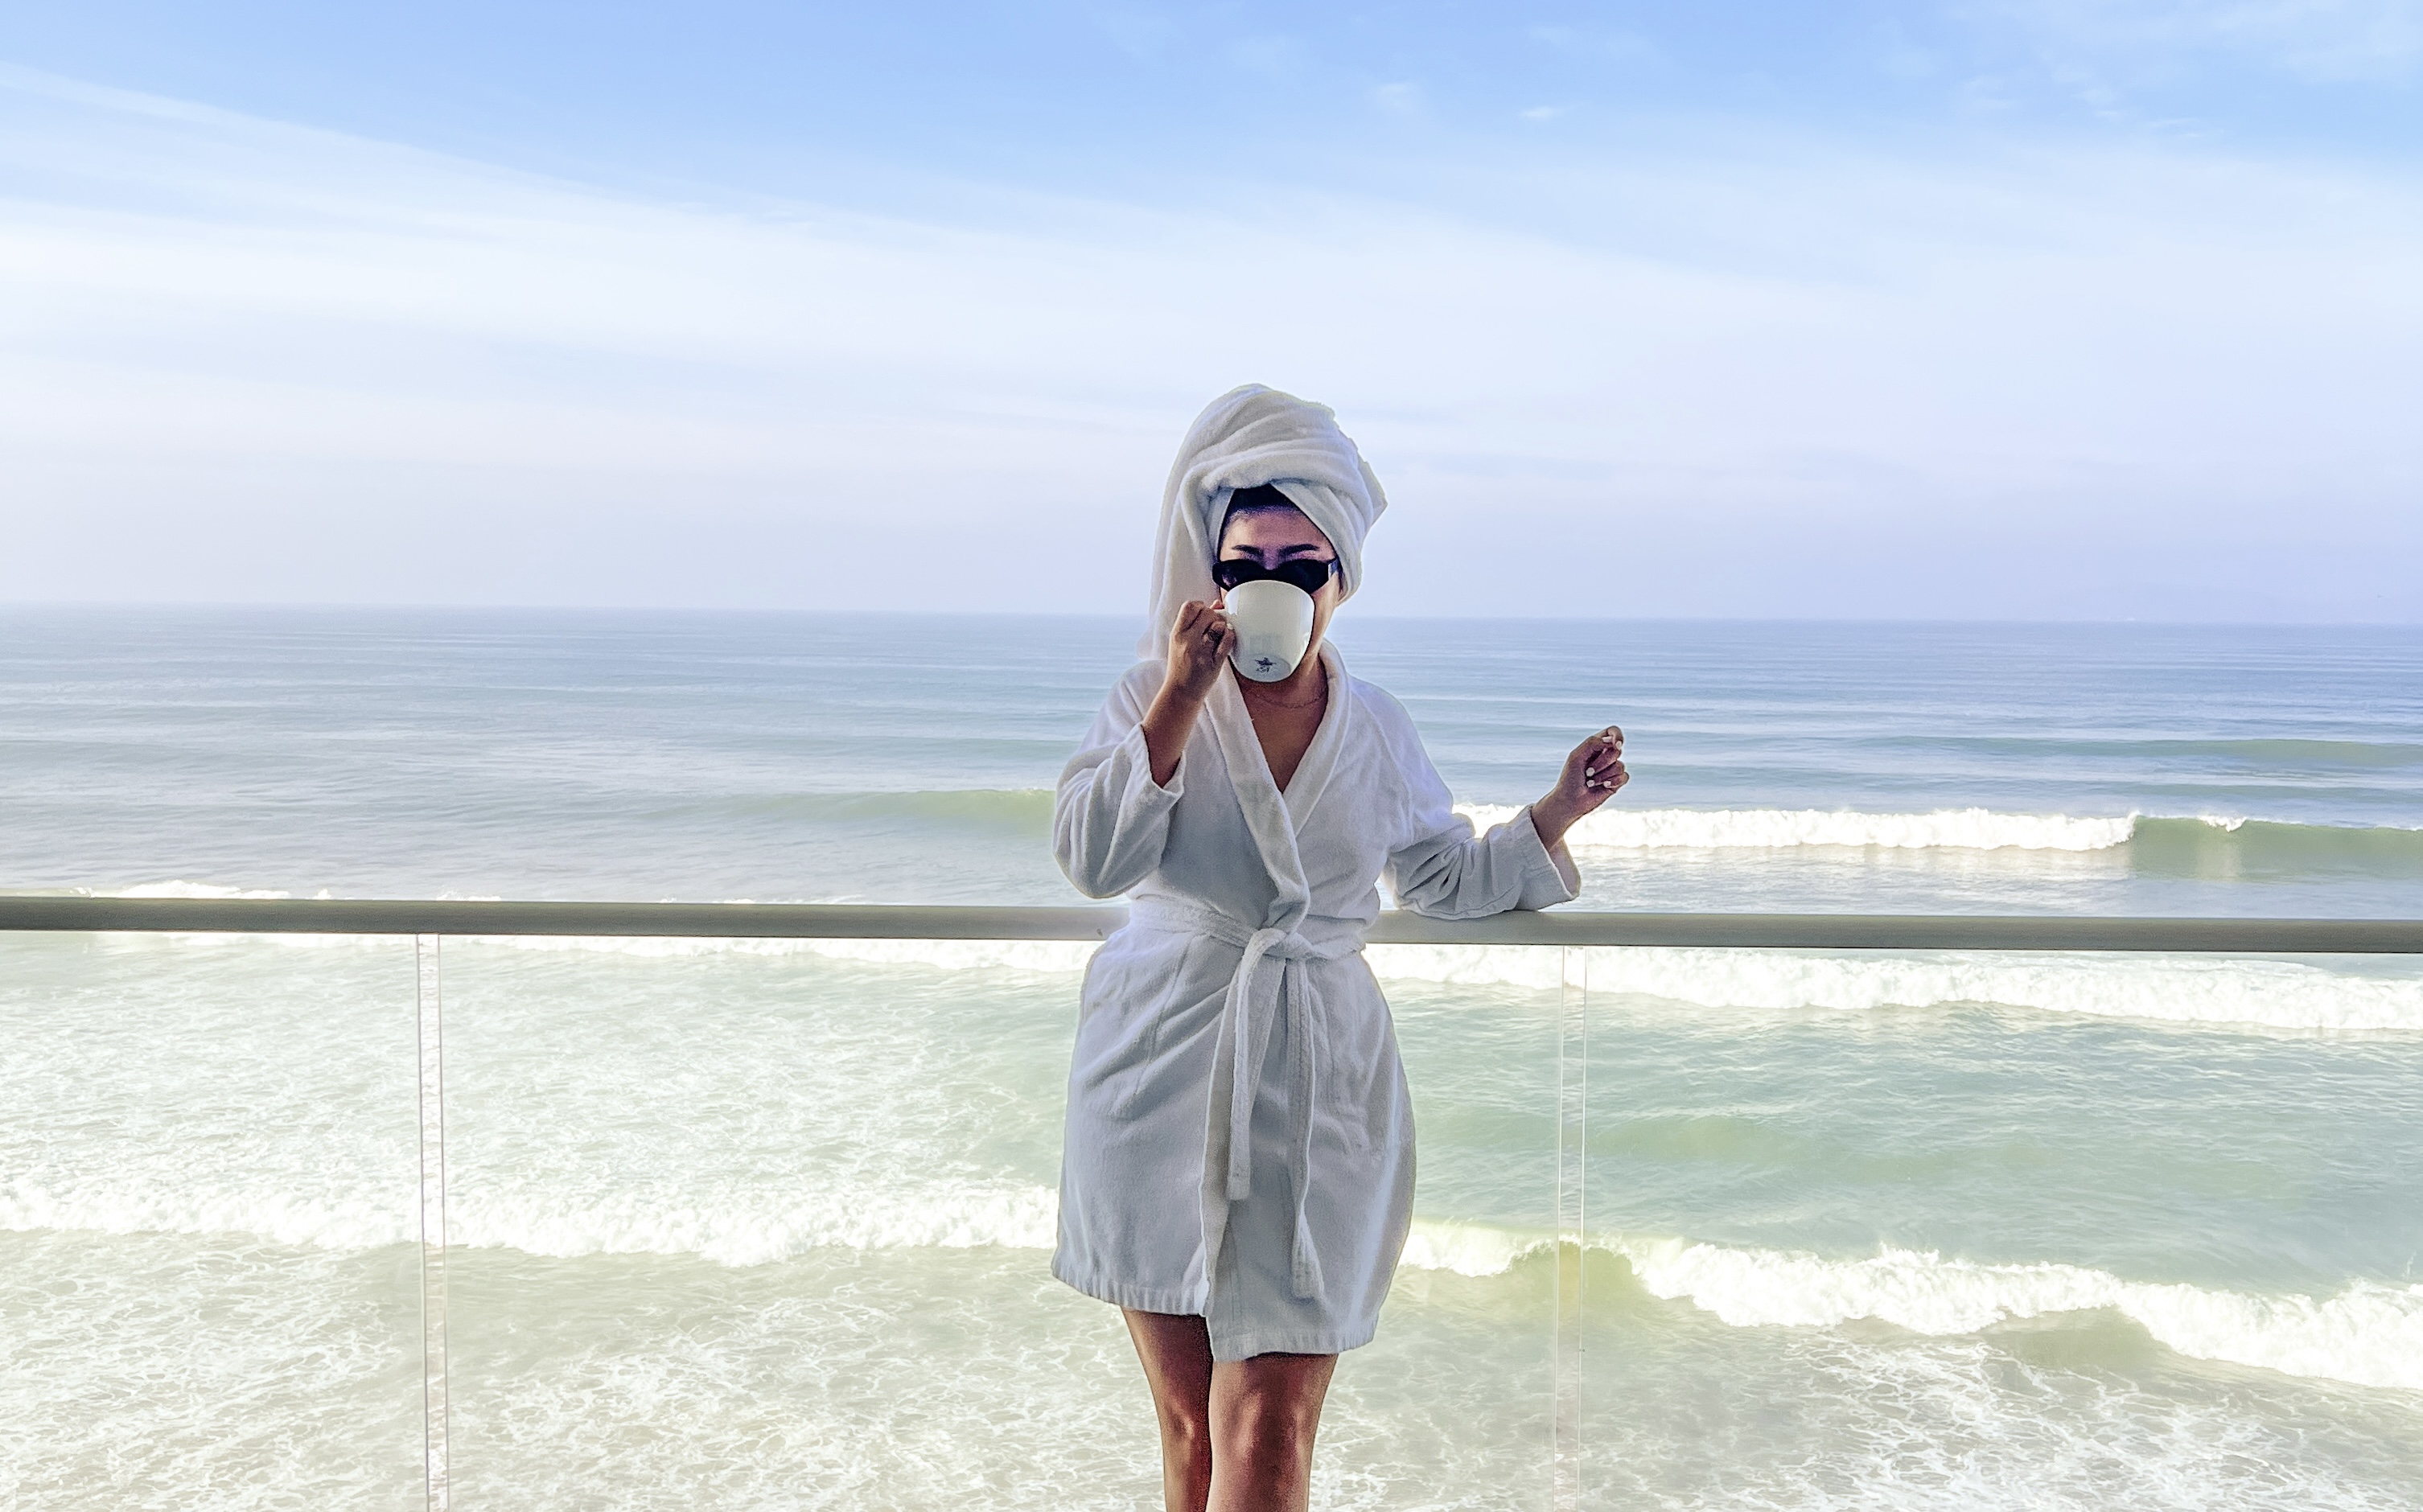 Yuna in a hair towel, bathrobe, and sunglasses sipping a cup of coffee while standing on a balcony with the ocean in the background